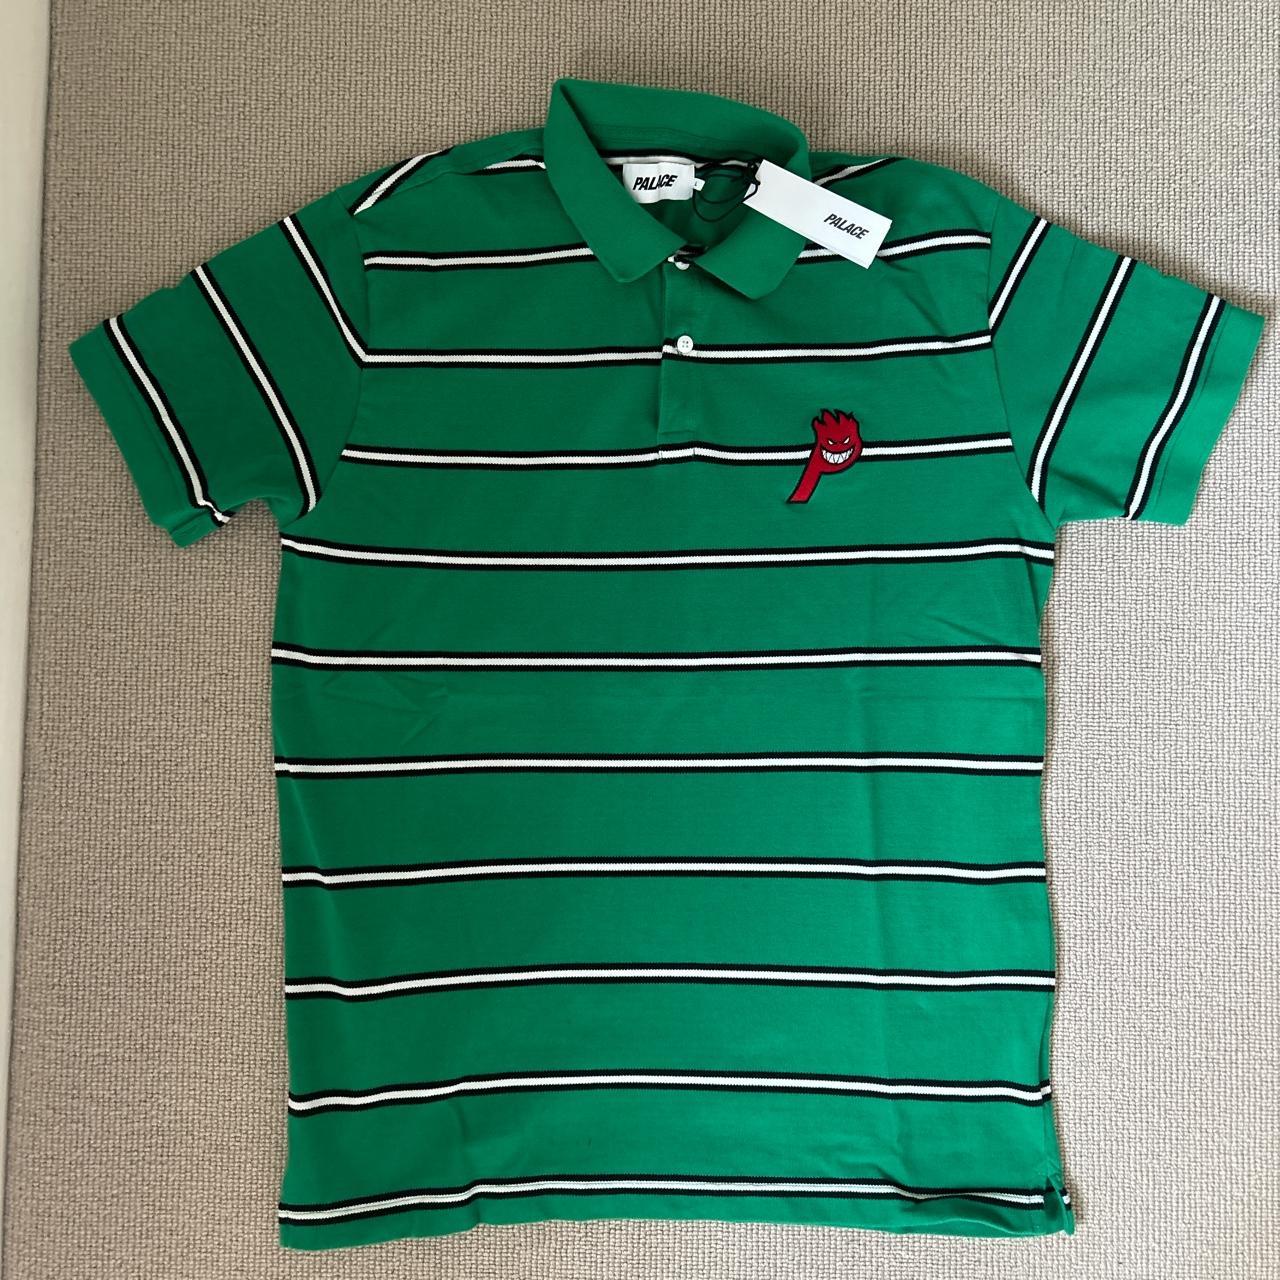 palace x spitfire green polo shirt with red... - Depop